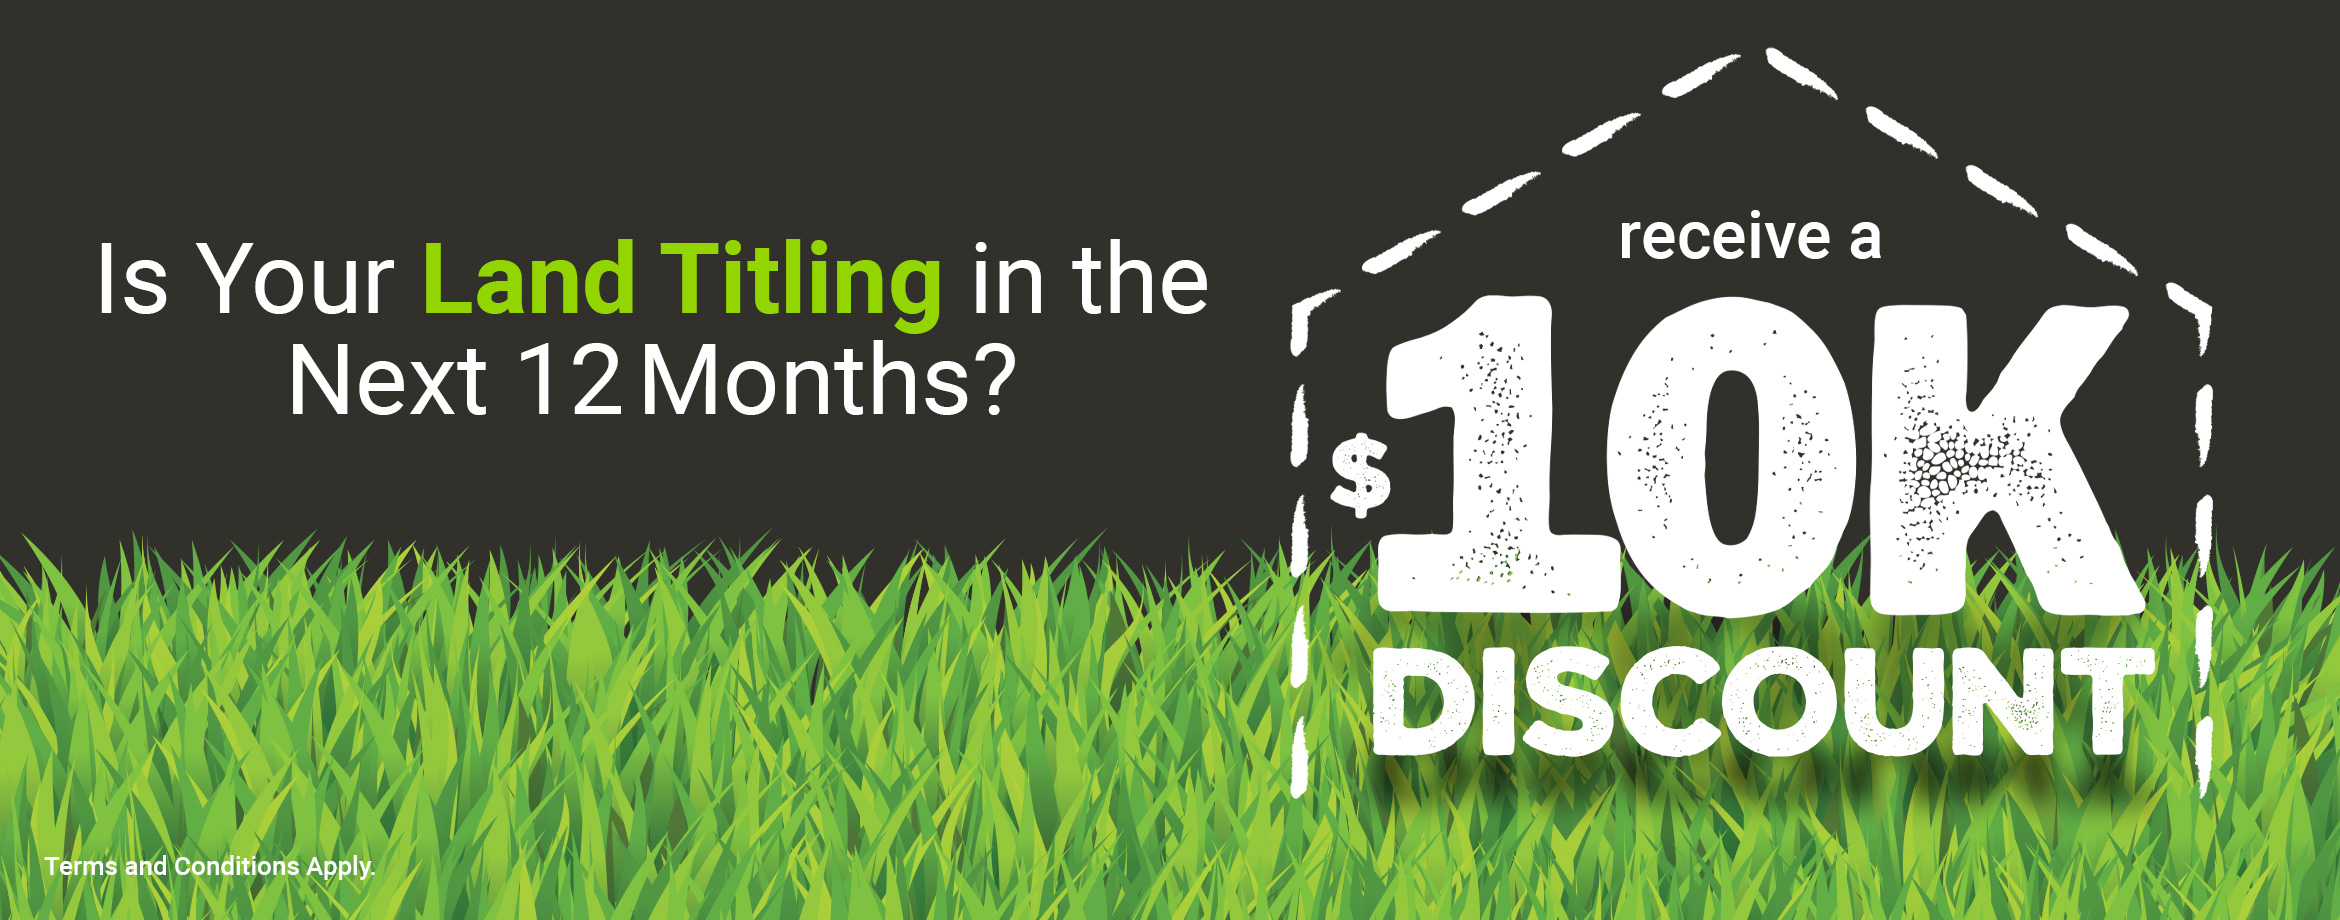 Is your land titling in 12 months? 10,000 Land Title Discount